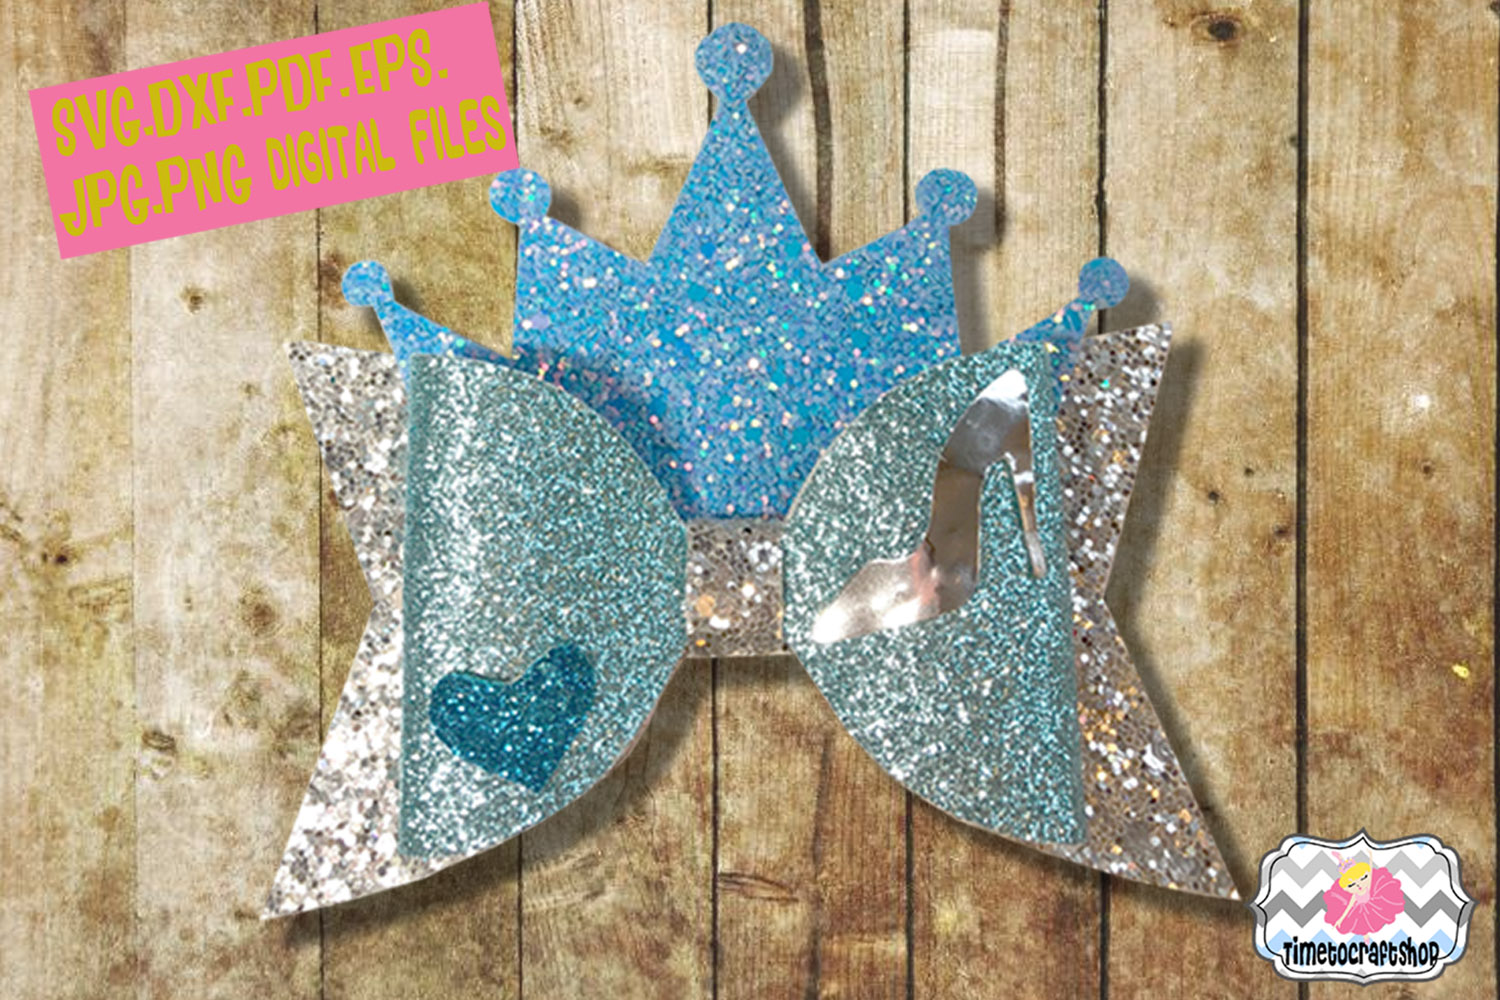 Download Princess Crown Glass Slippers Inspired Hair Bow (137267 ...